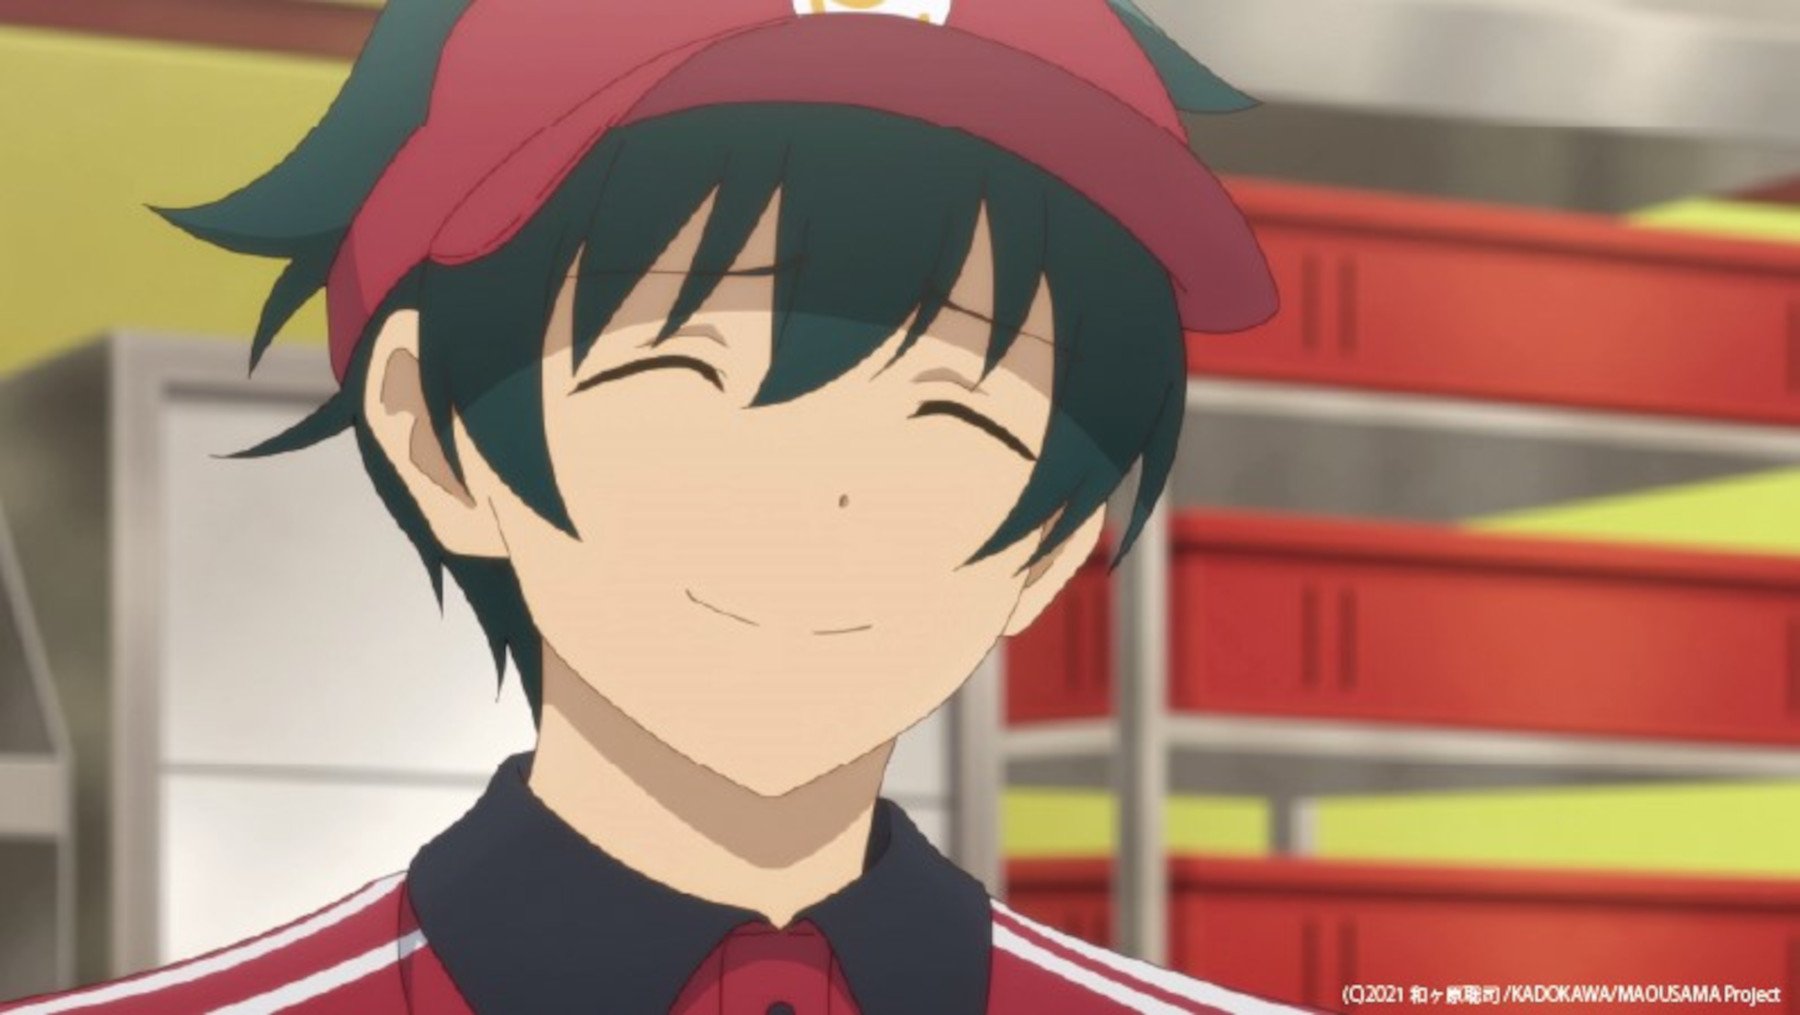 Sadao Maou in 'The Devil Is a Part-Timer' Season 2, which airs new episodes every Thursday. He's smiling and wearing a red visor.